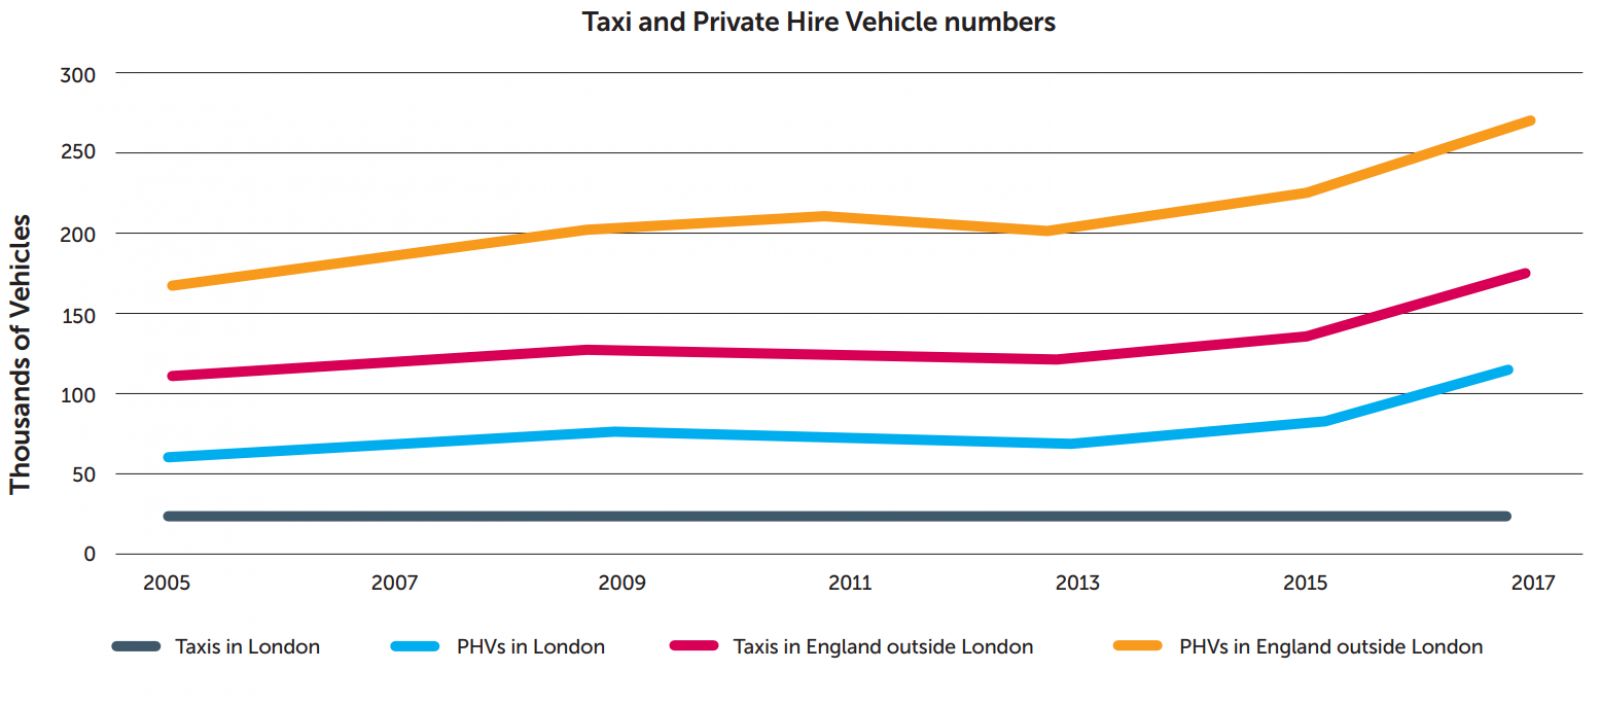  Numbers of Taxis and PHVs graph